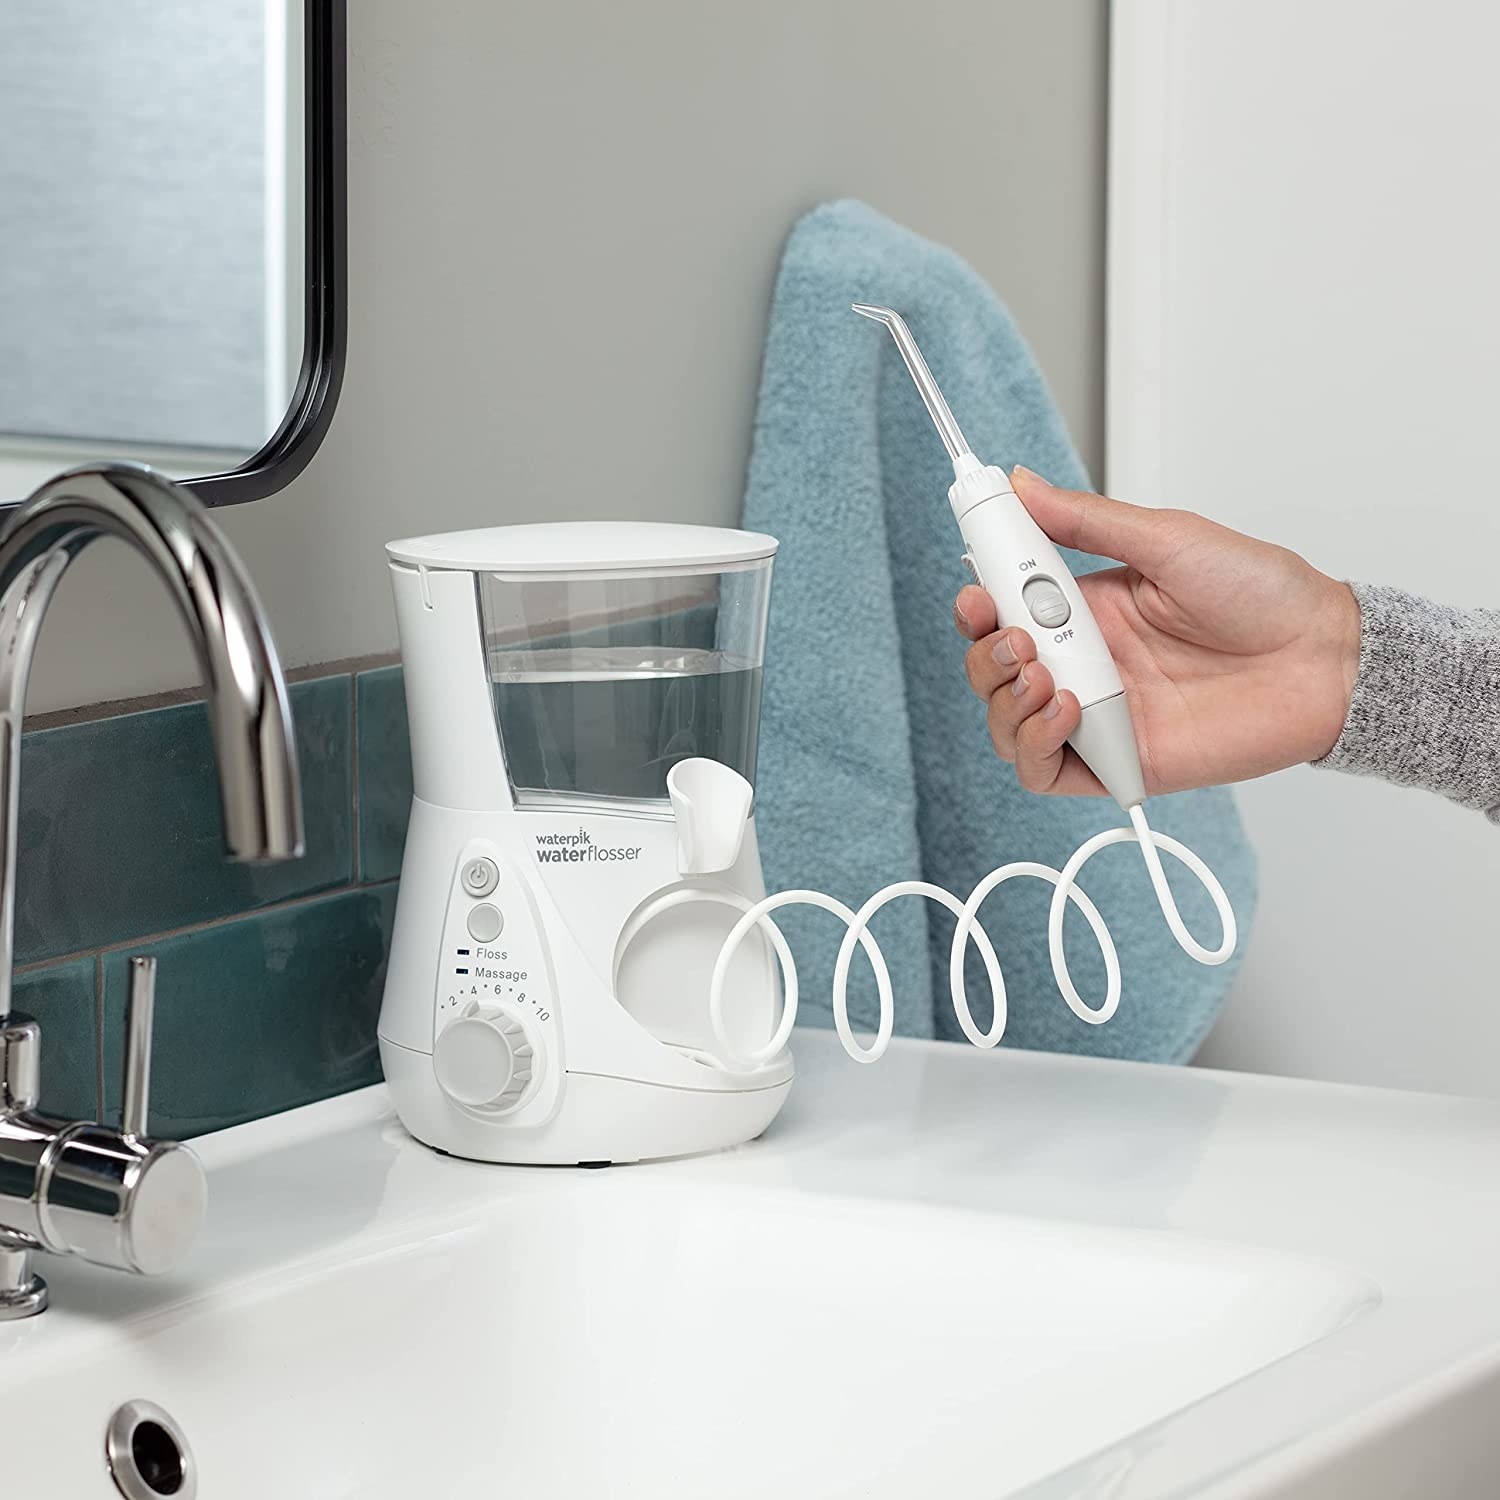 the WaterPik sitting on a bathroom counter